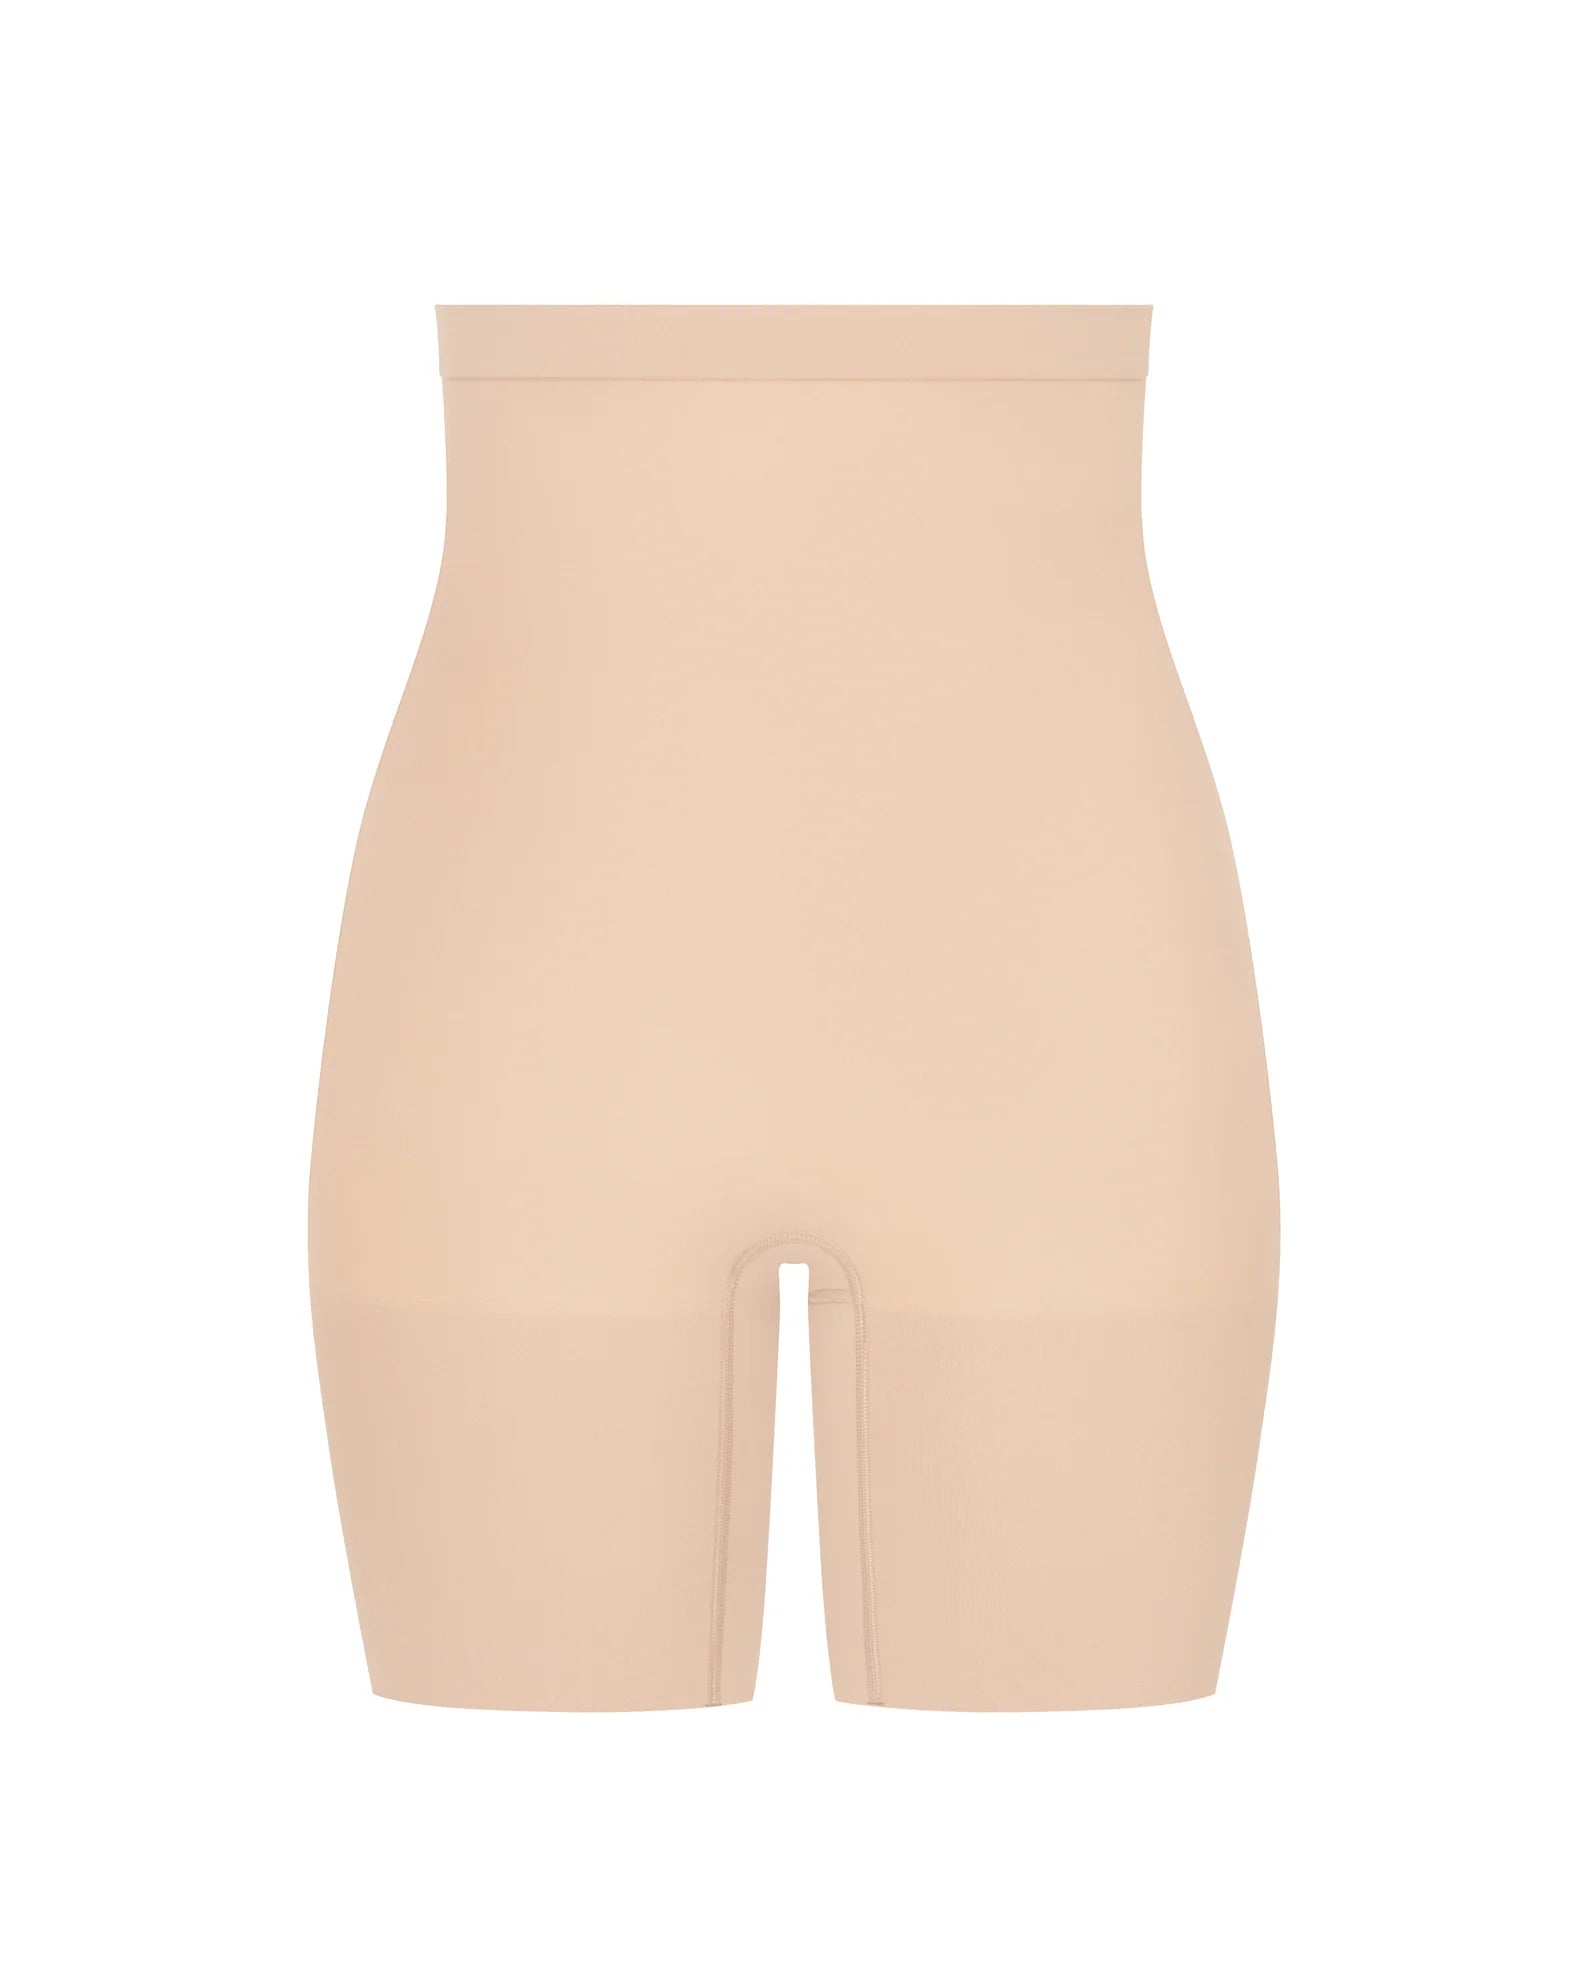 The Higher Power Short by Spanx – The Pretty Pink Rooster Boutique